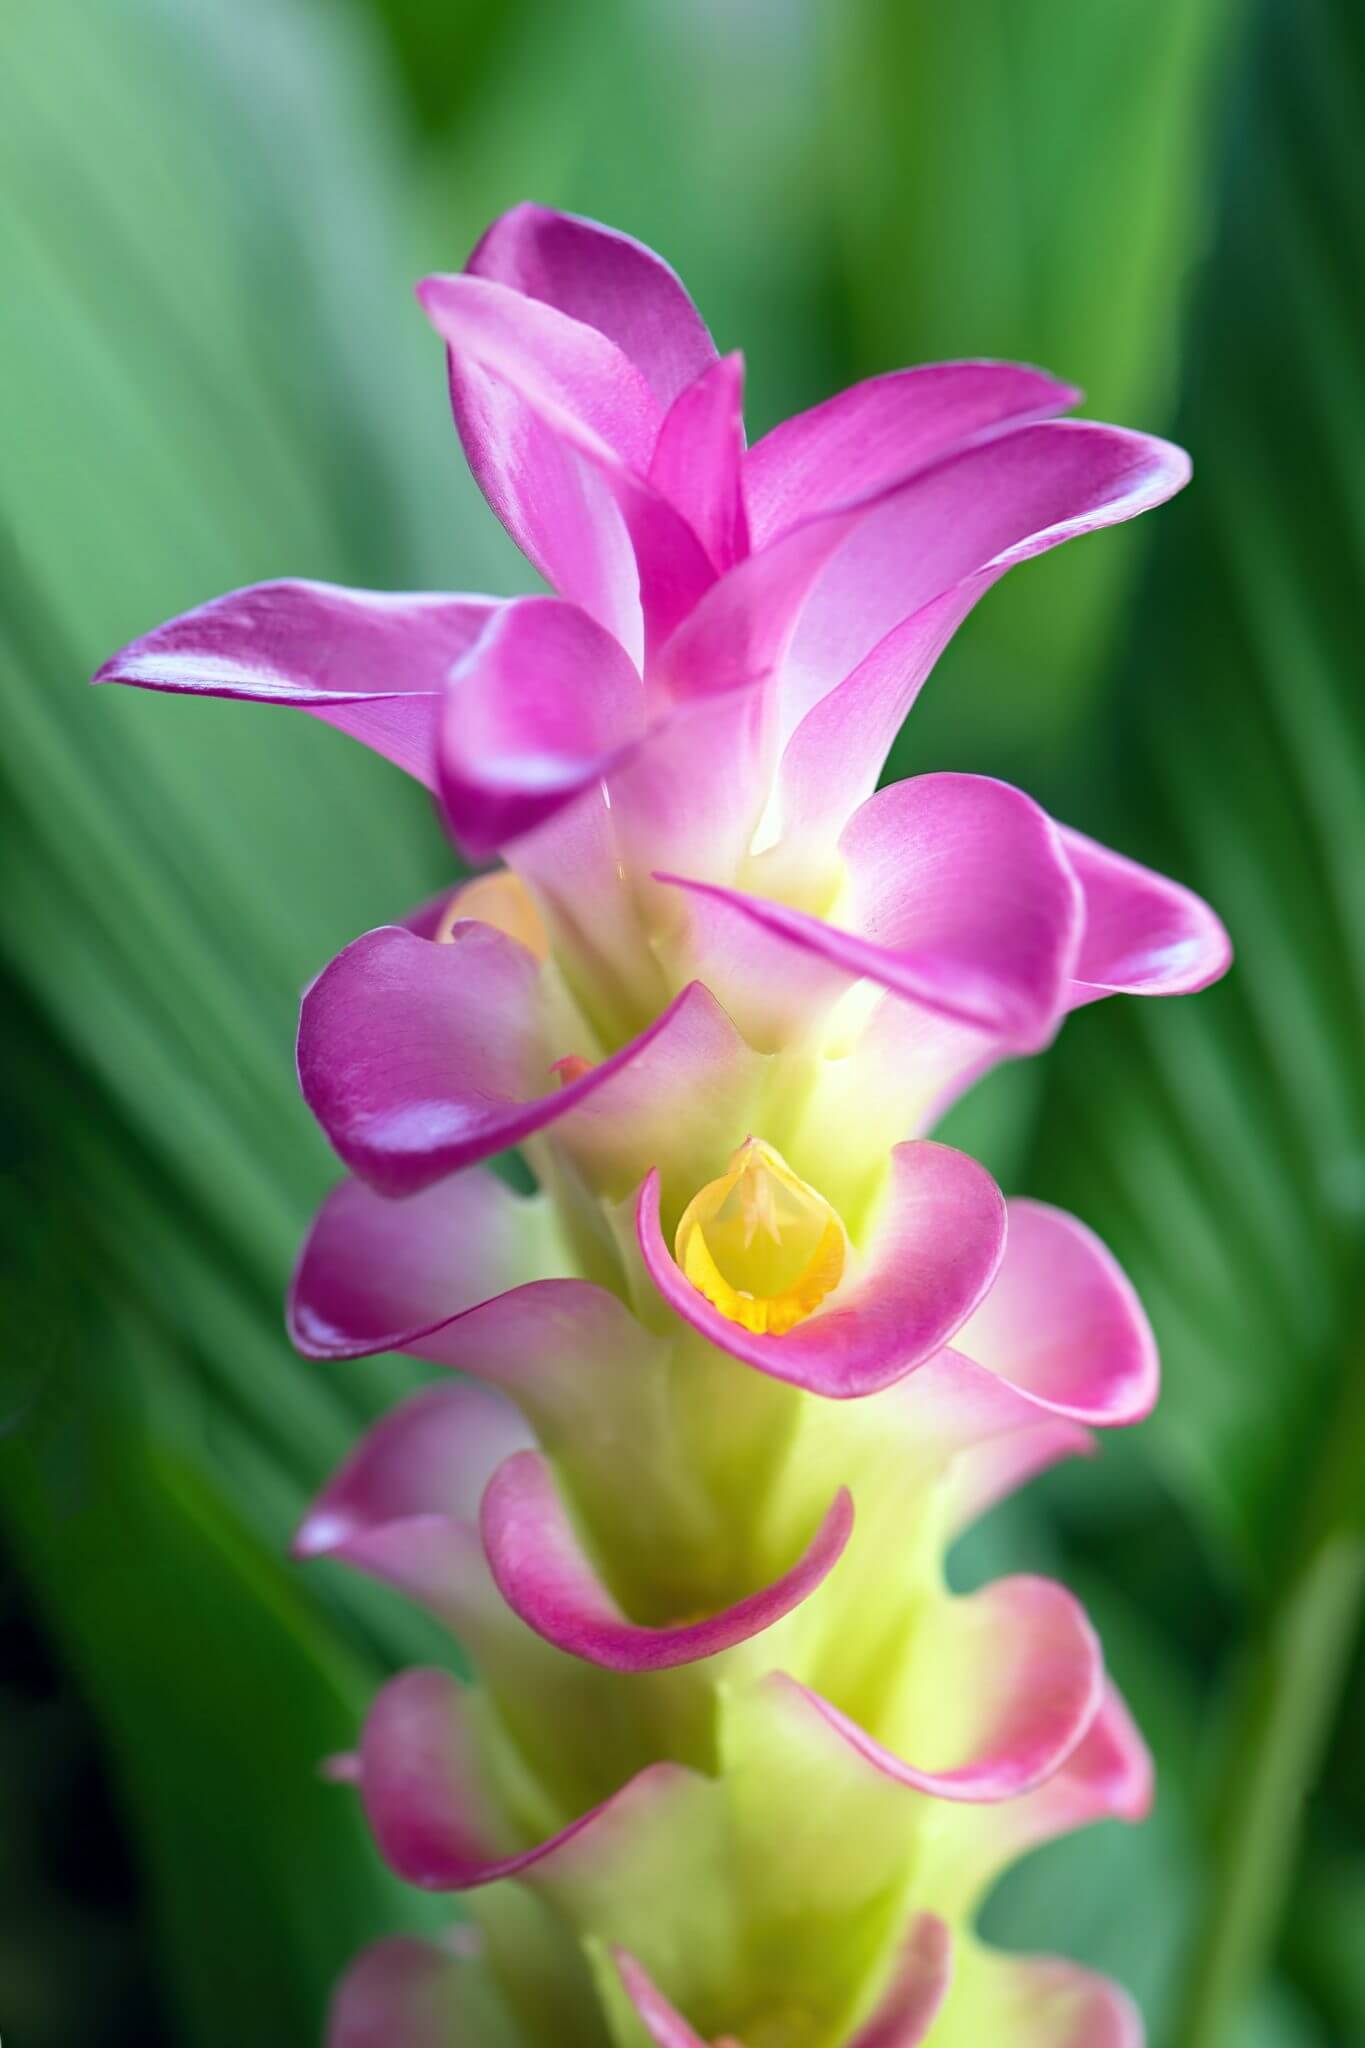 The Turmeric flower comes in various colours in India.